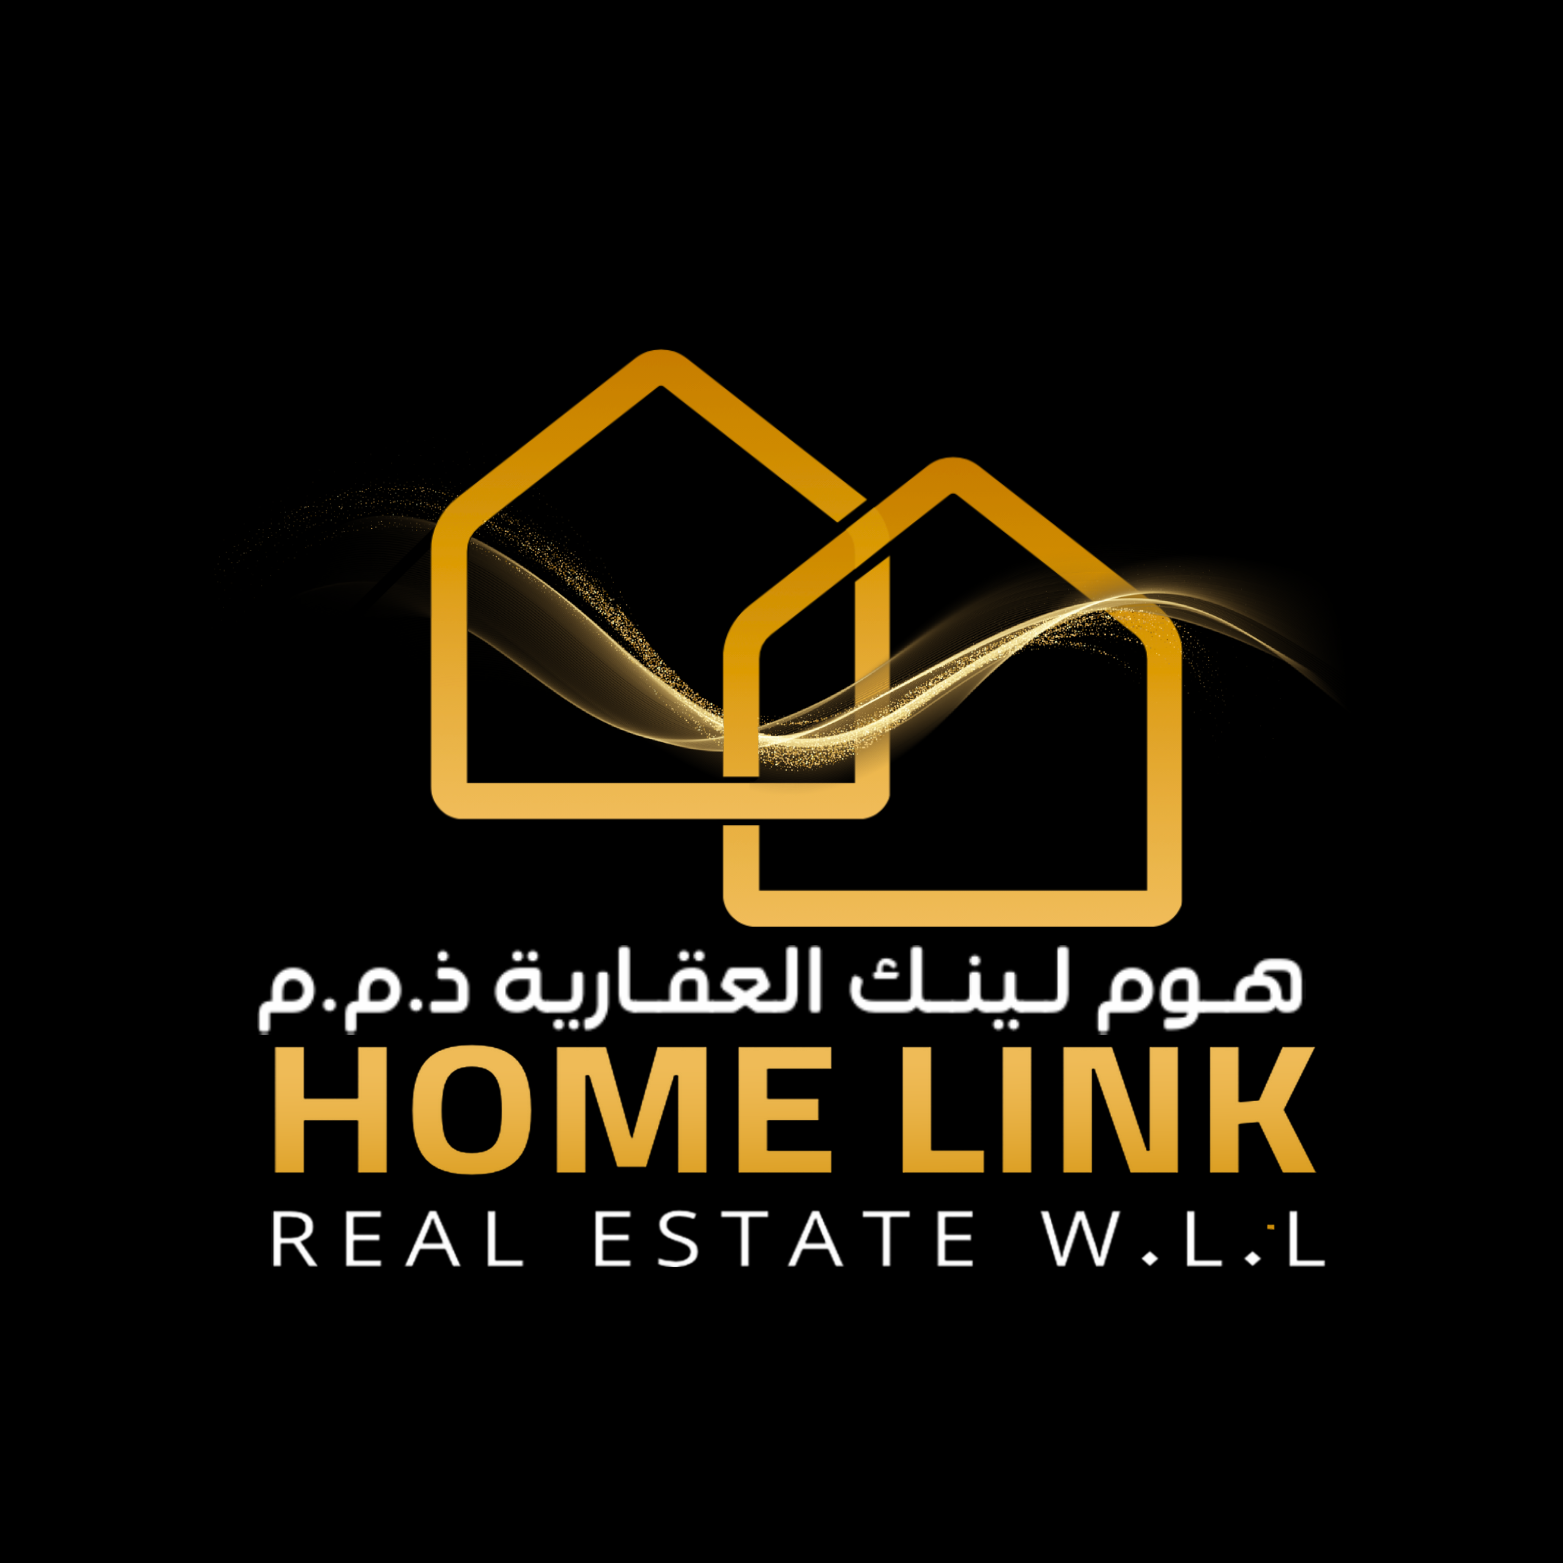 AA Home Link Real Estate W.L.L